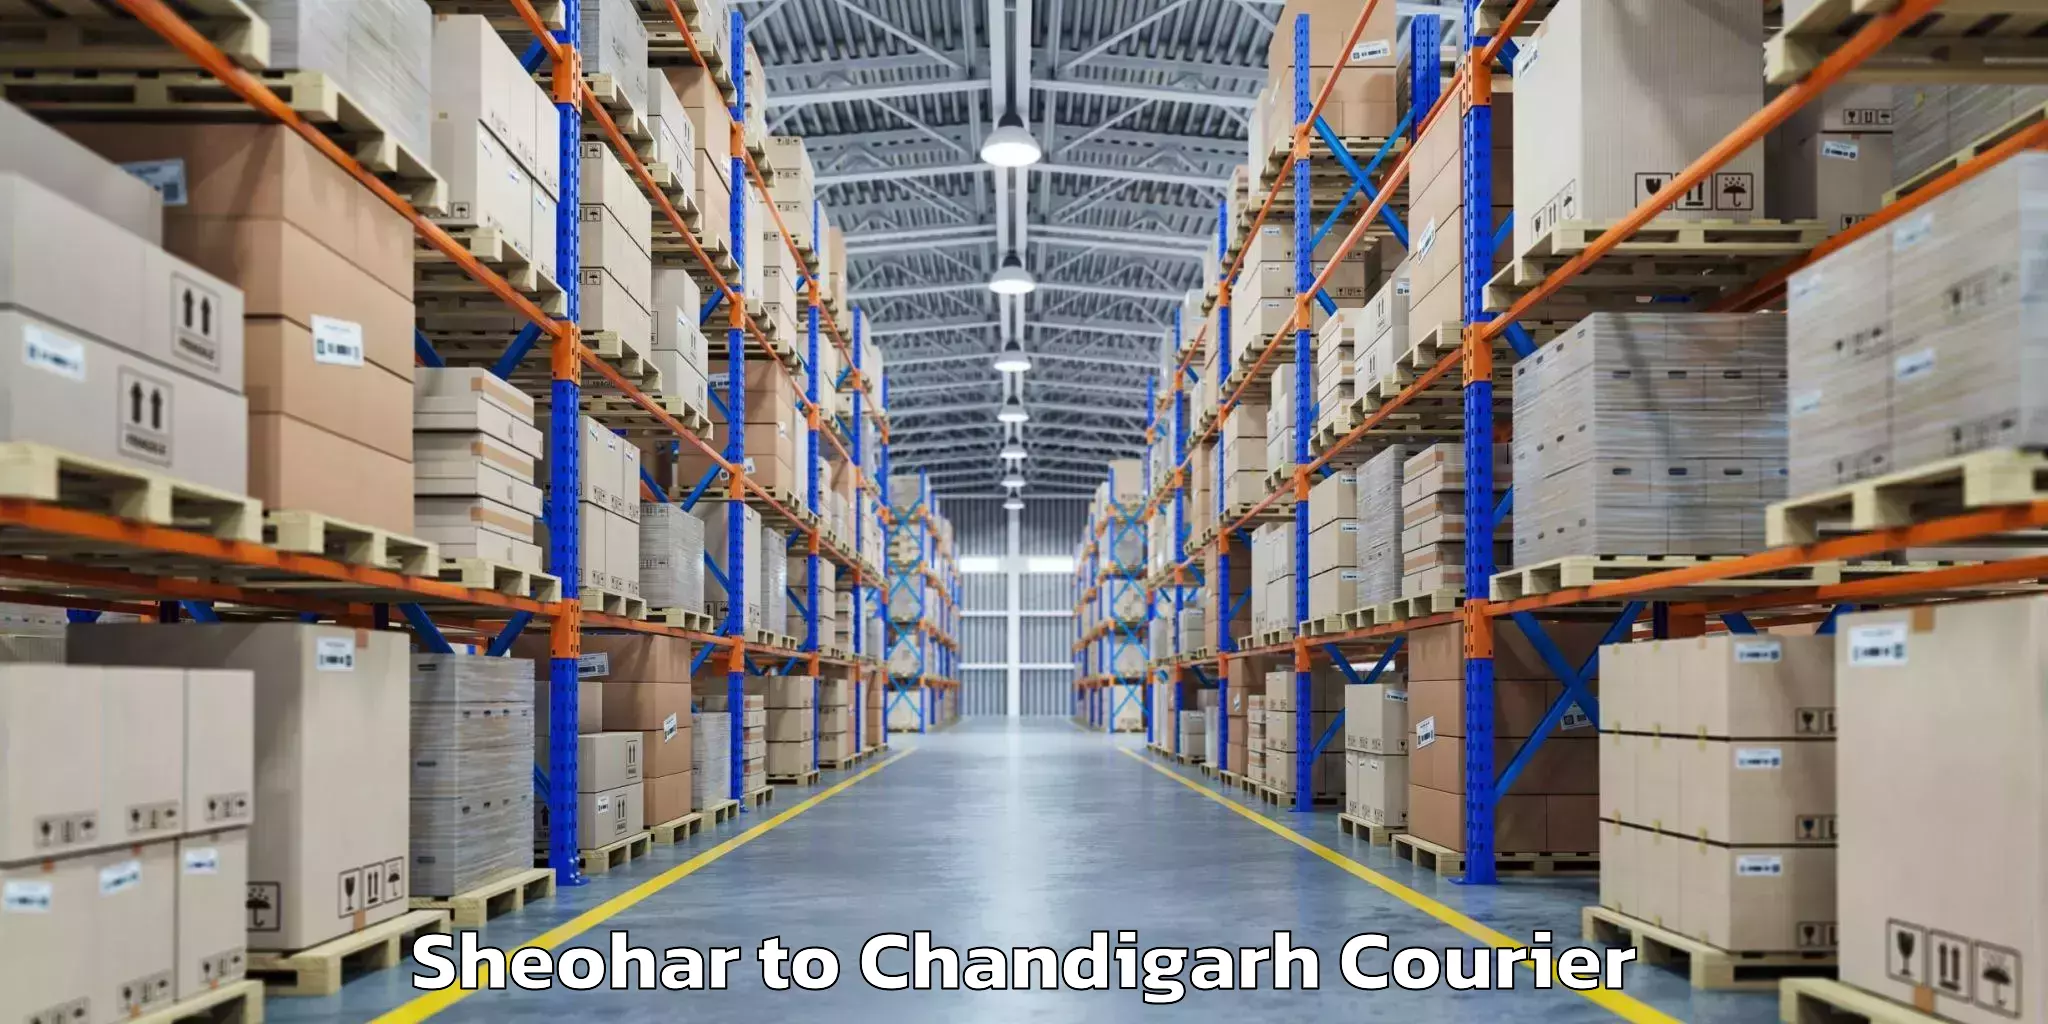 Baggage transport professionals Sheohar to Chandigarh